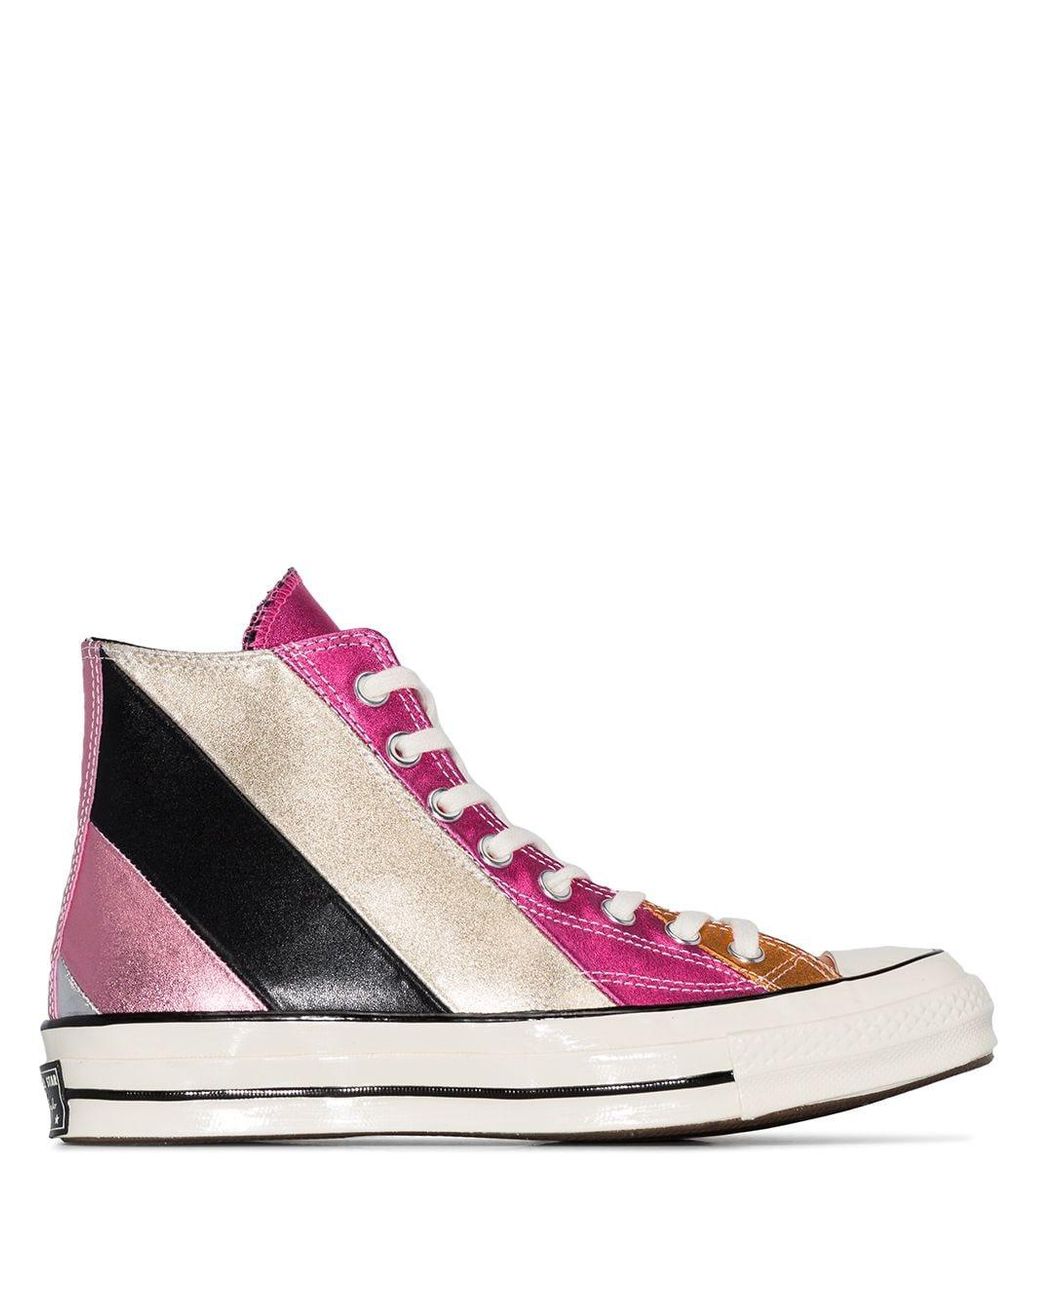 Converse Chuck 70 Striped High Top Sneakers | Lyst